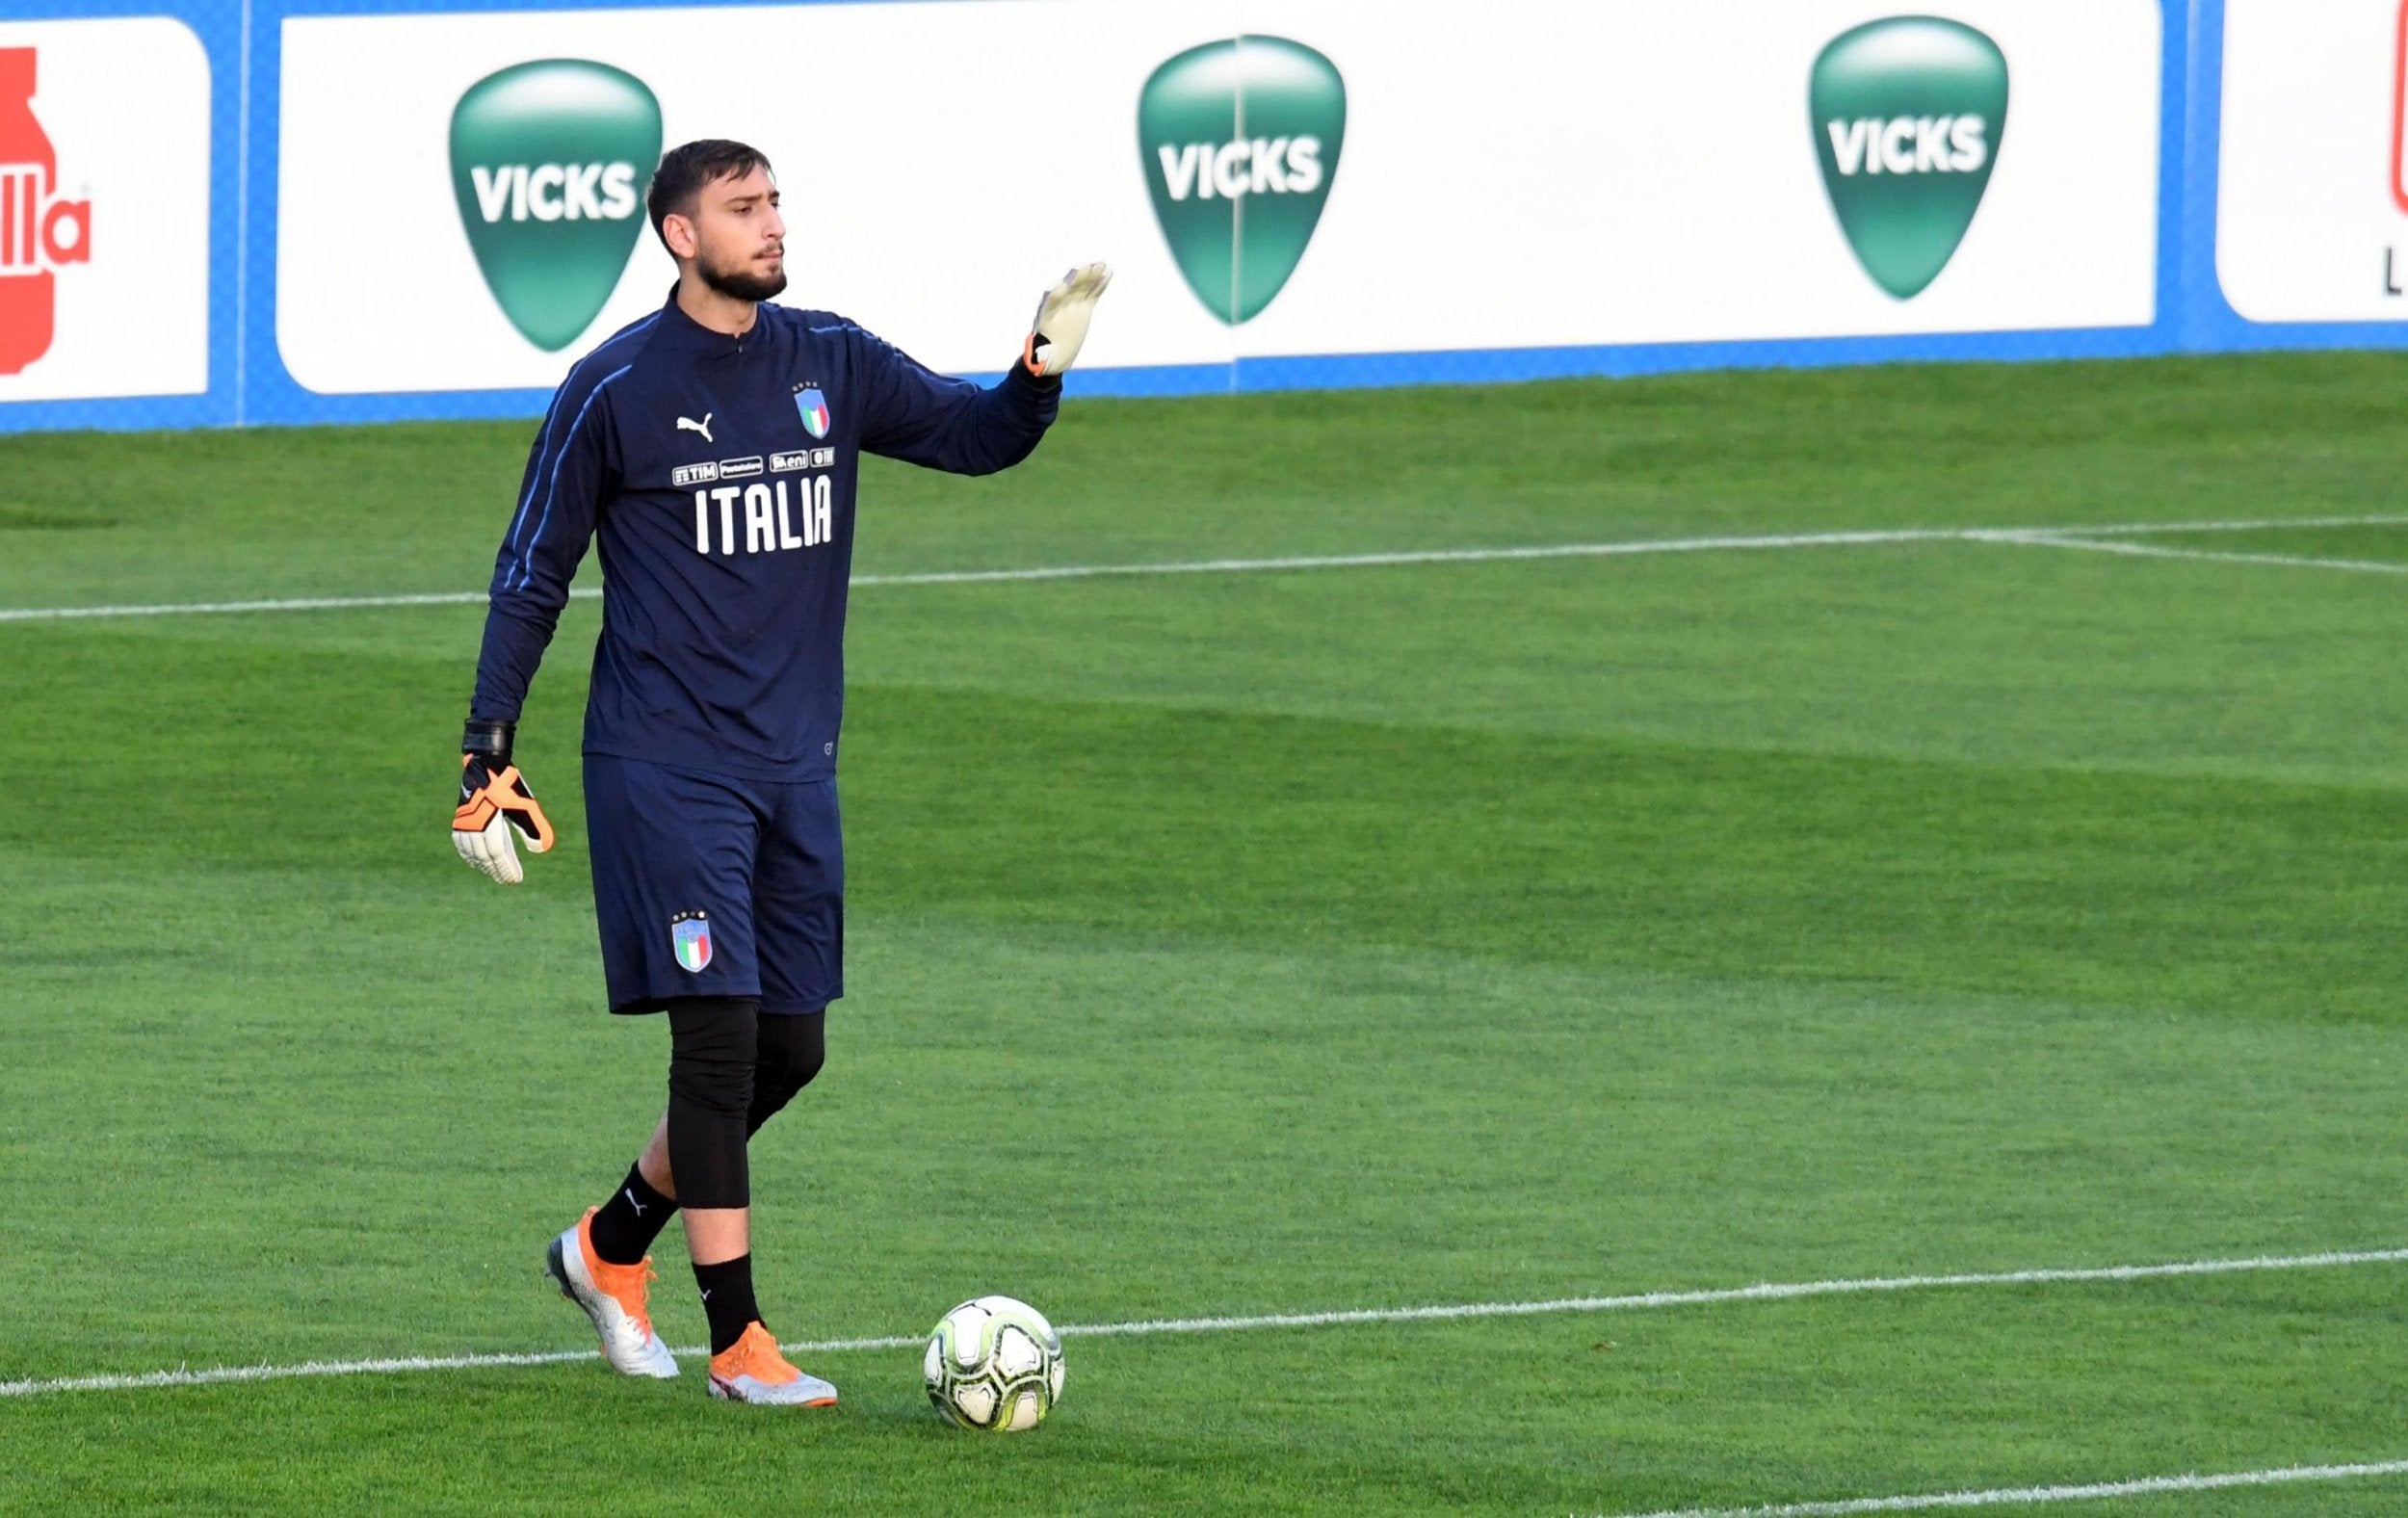 Donnarumma will be hoping for positive performance